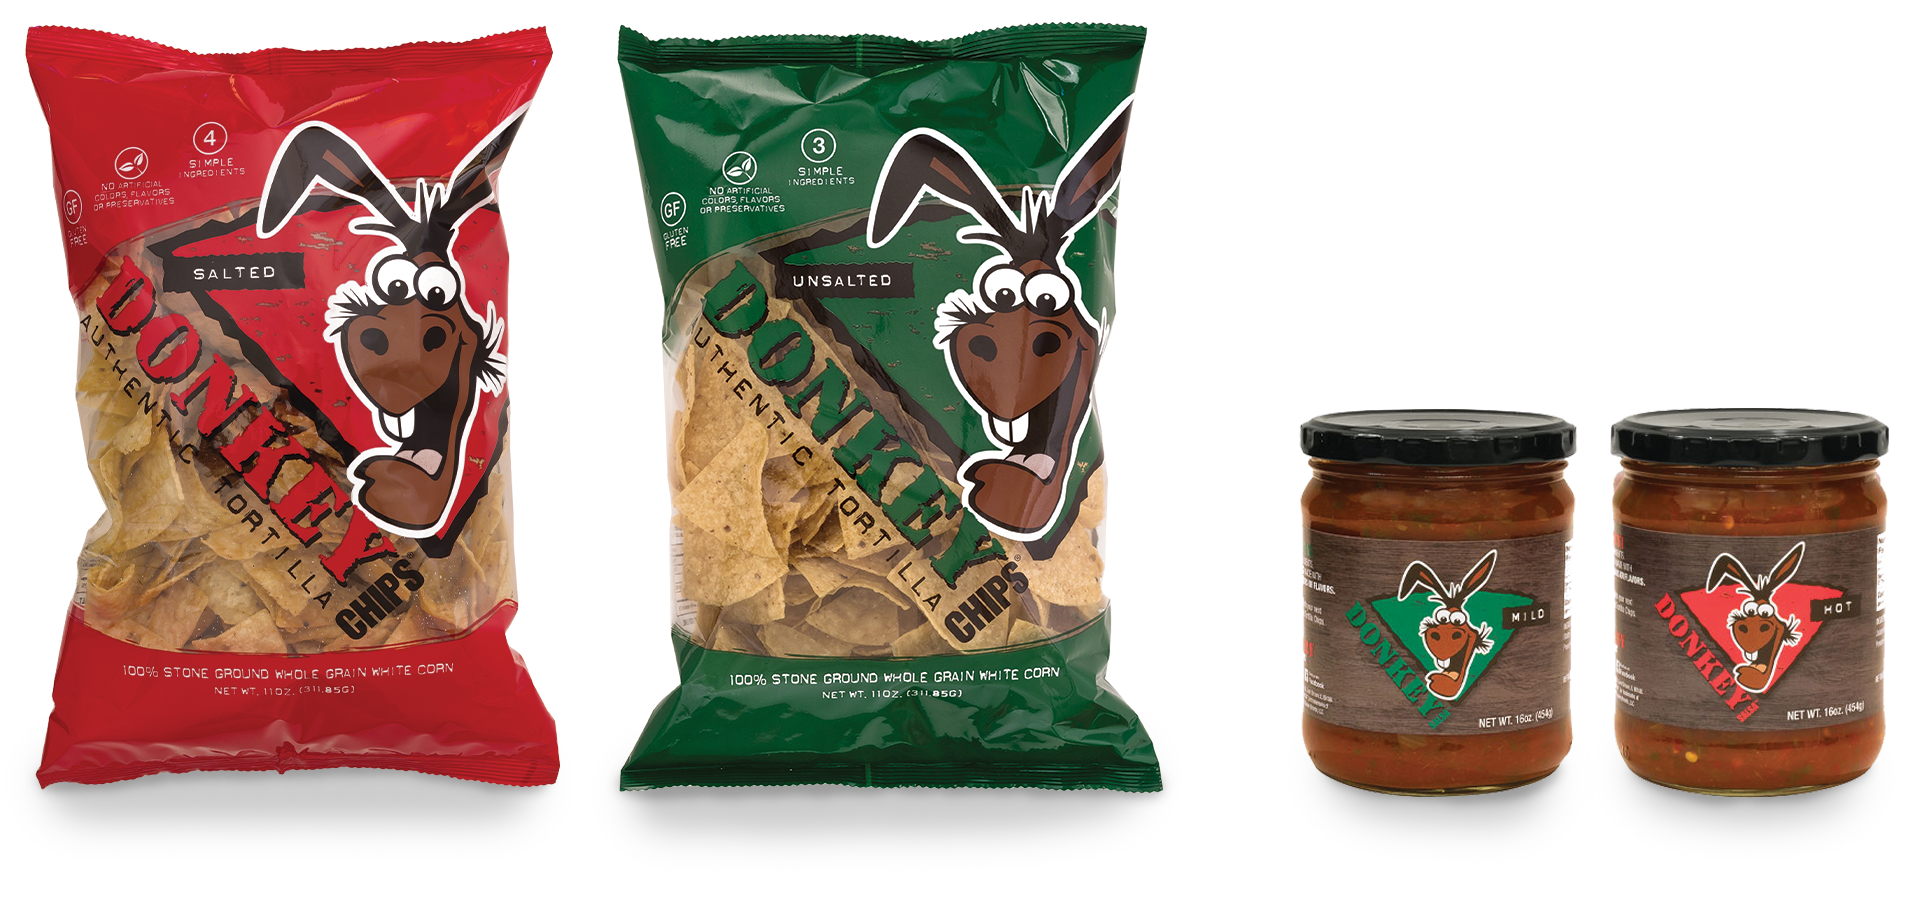 Donkey Brands full product line up including images of Salted and Unsalted Donkey Chips, Mild and Hot Donkey Salsa